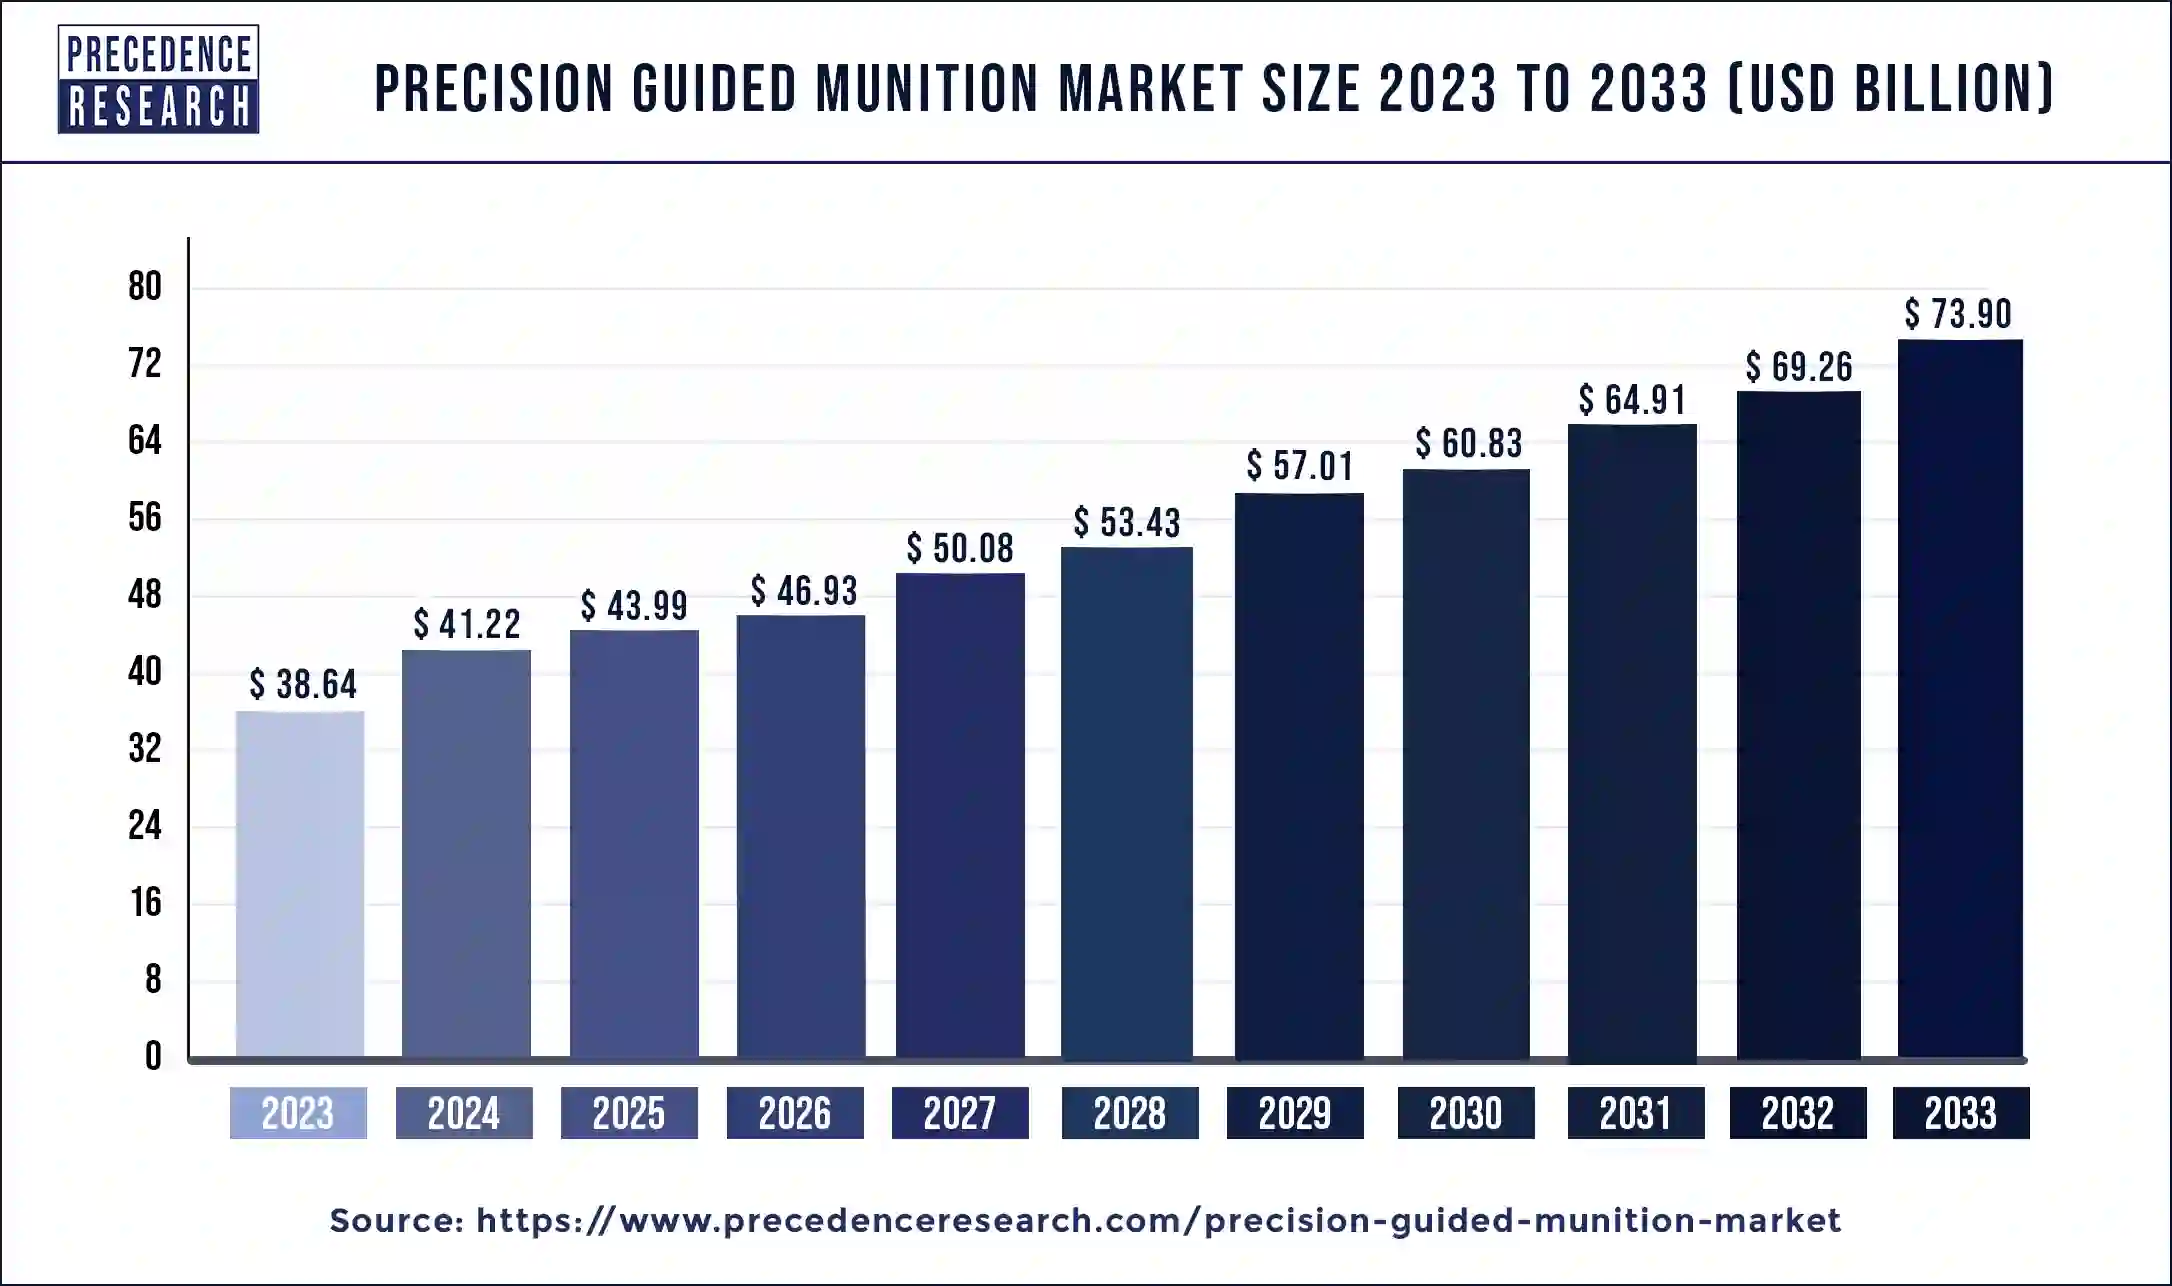 Precision Guided Munition Market Size 2024 to 2033